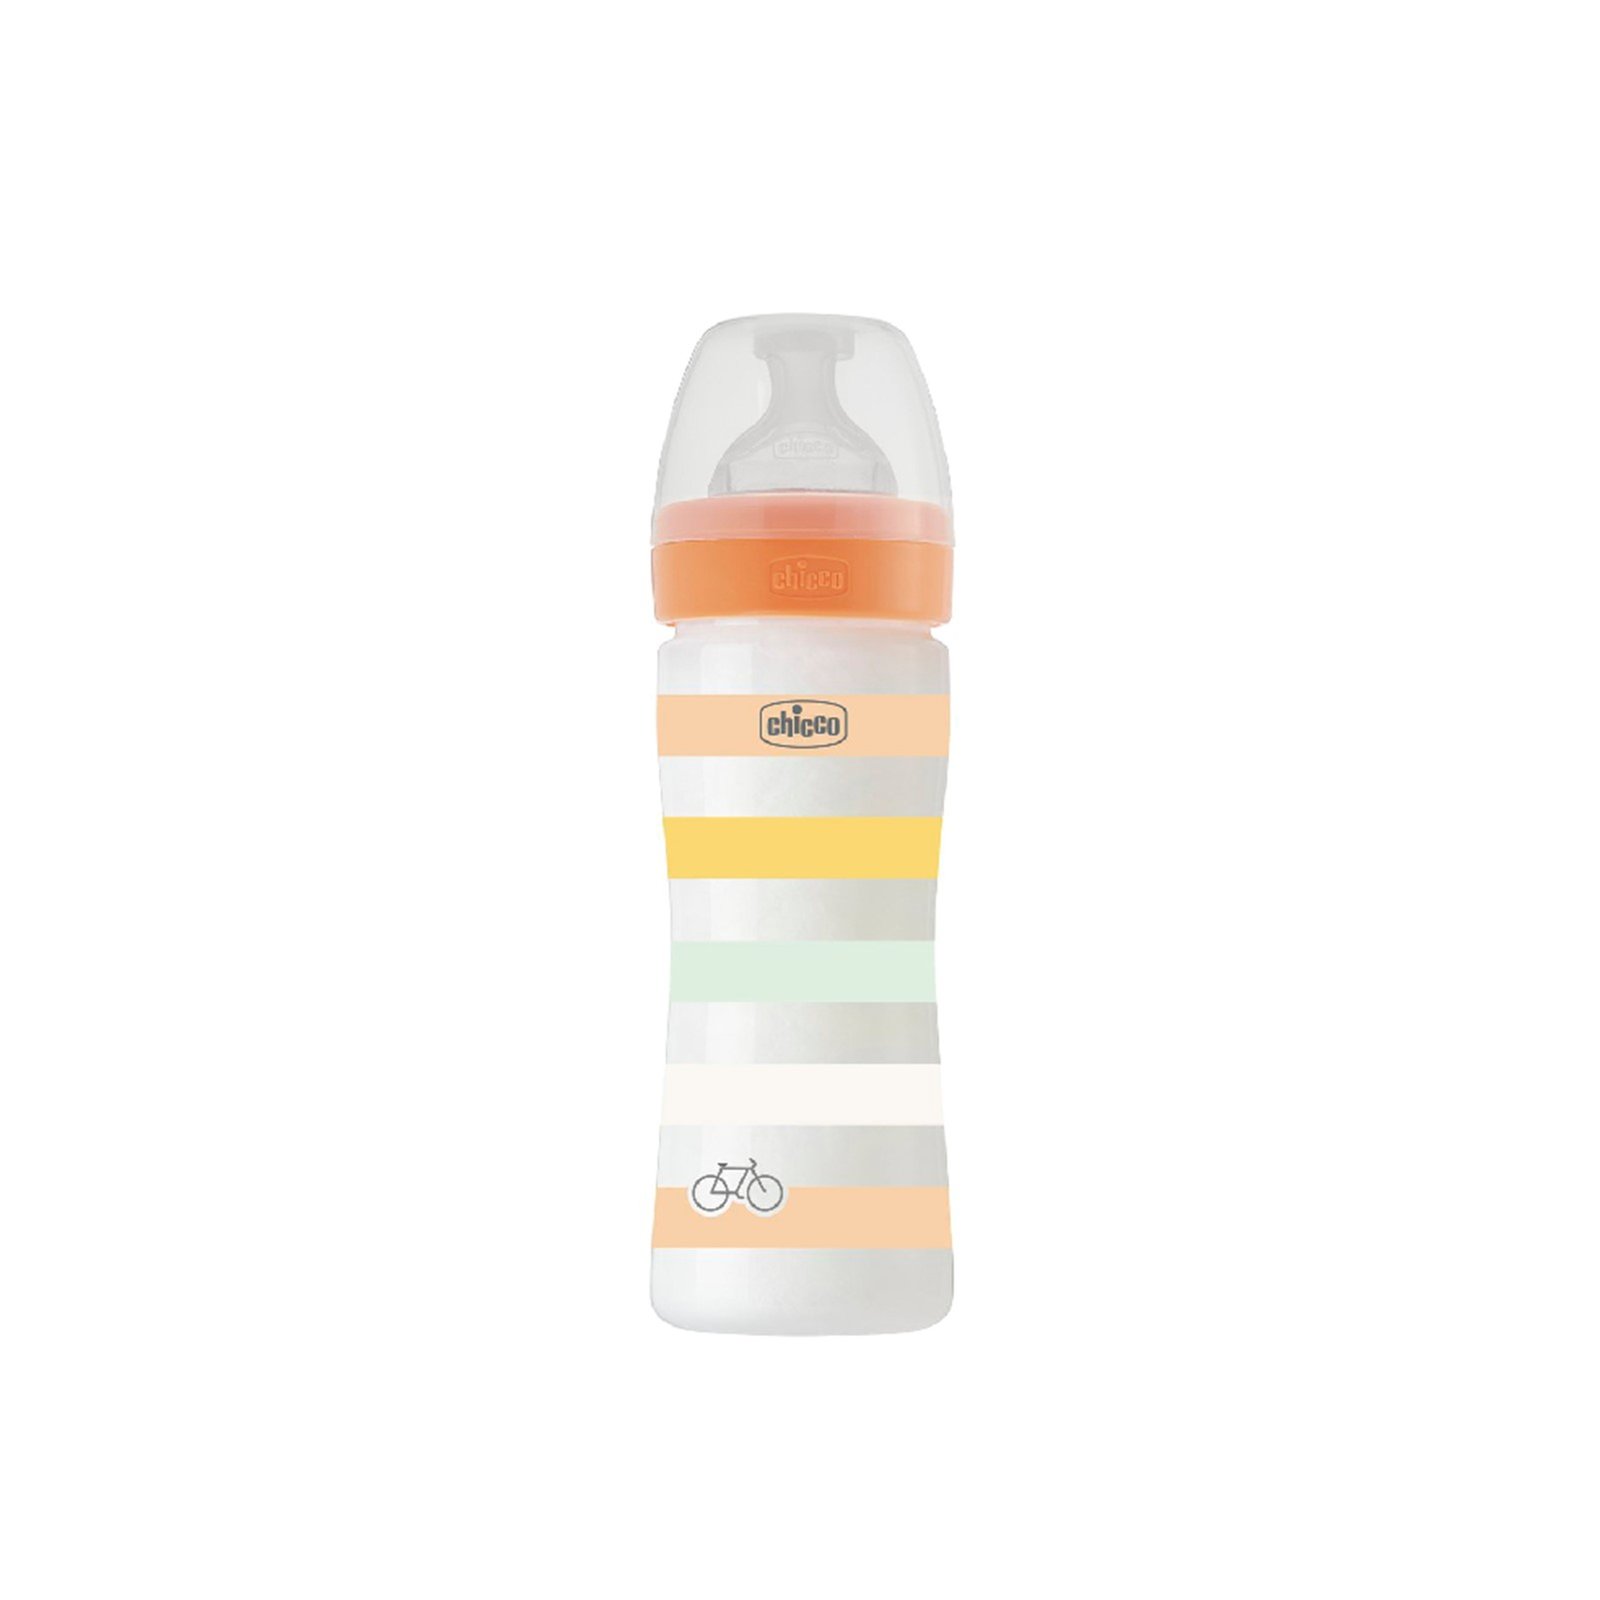 Chicco Well-Being Colors Bottle 2m+ Orange 250ml